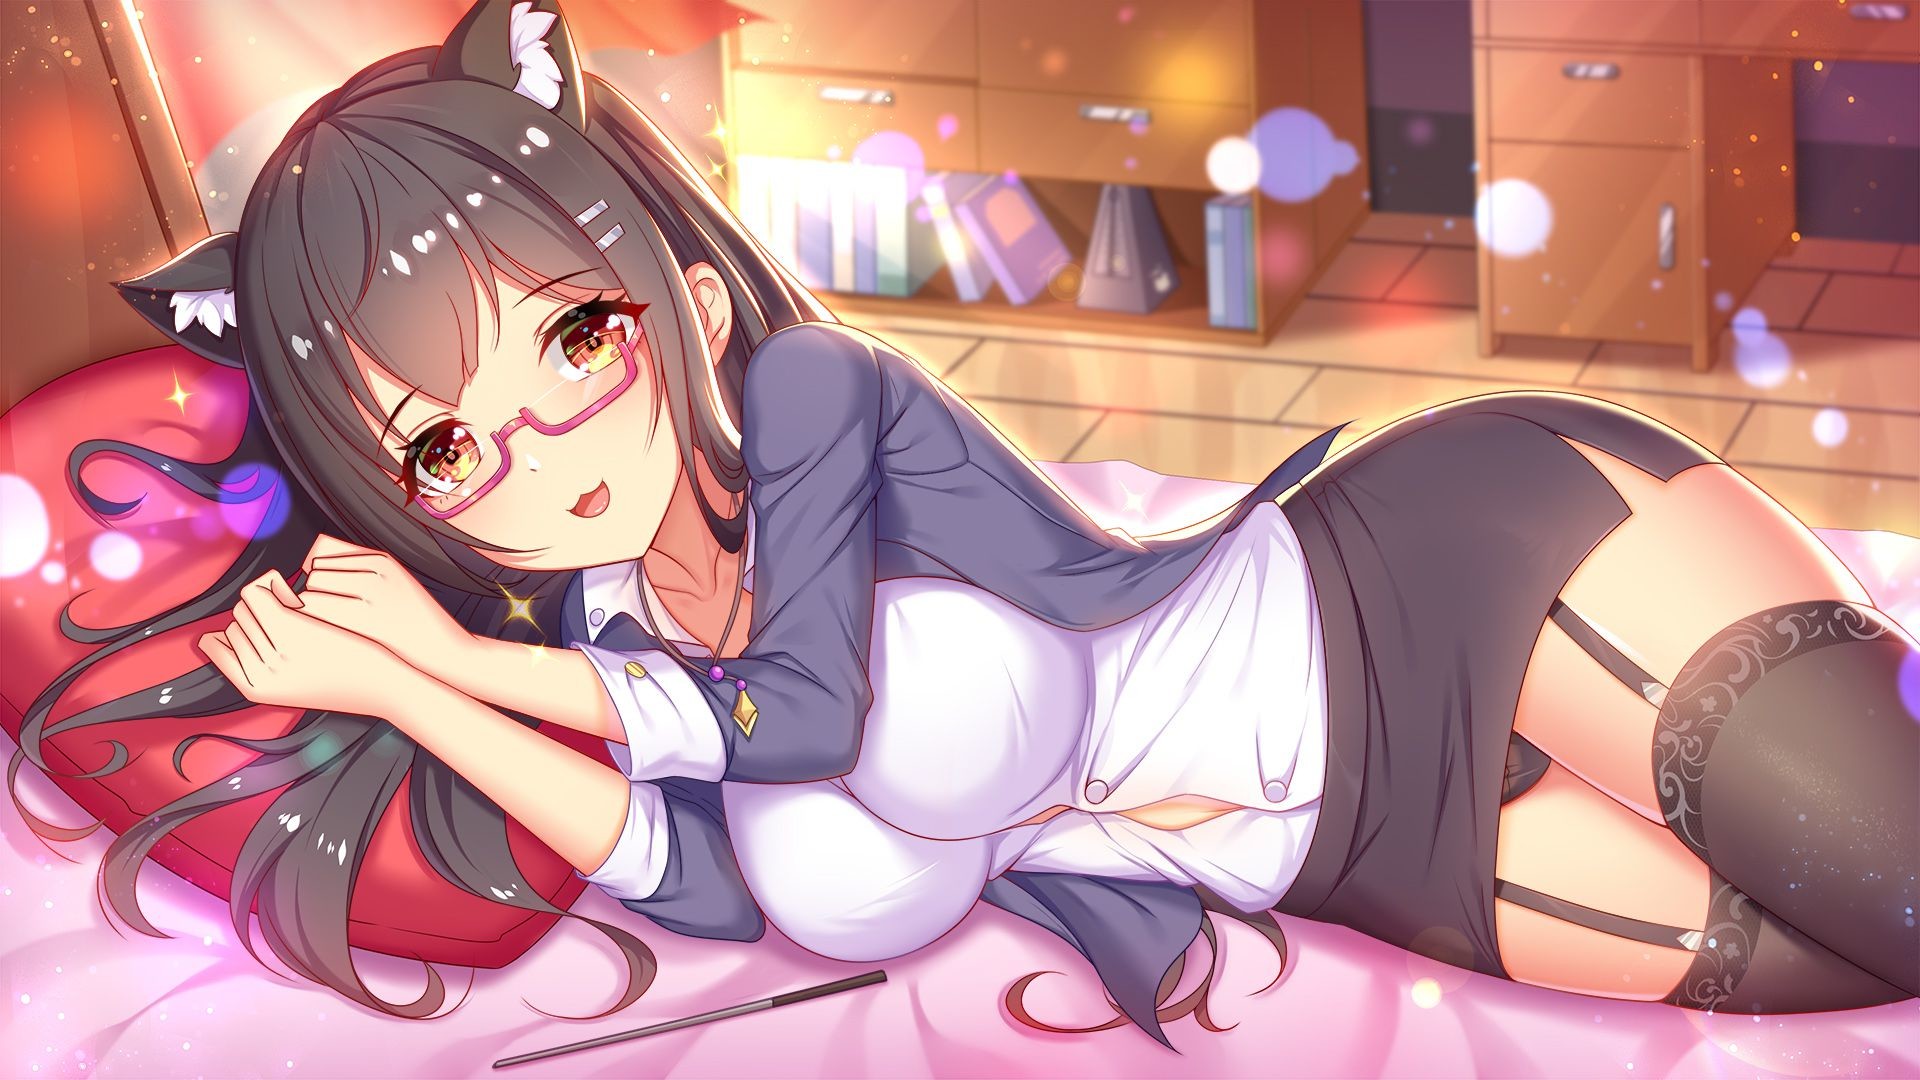 Pretty Neko - 18+ Adult Only Content on Steam